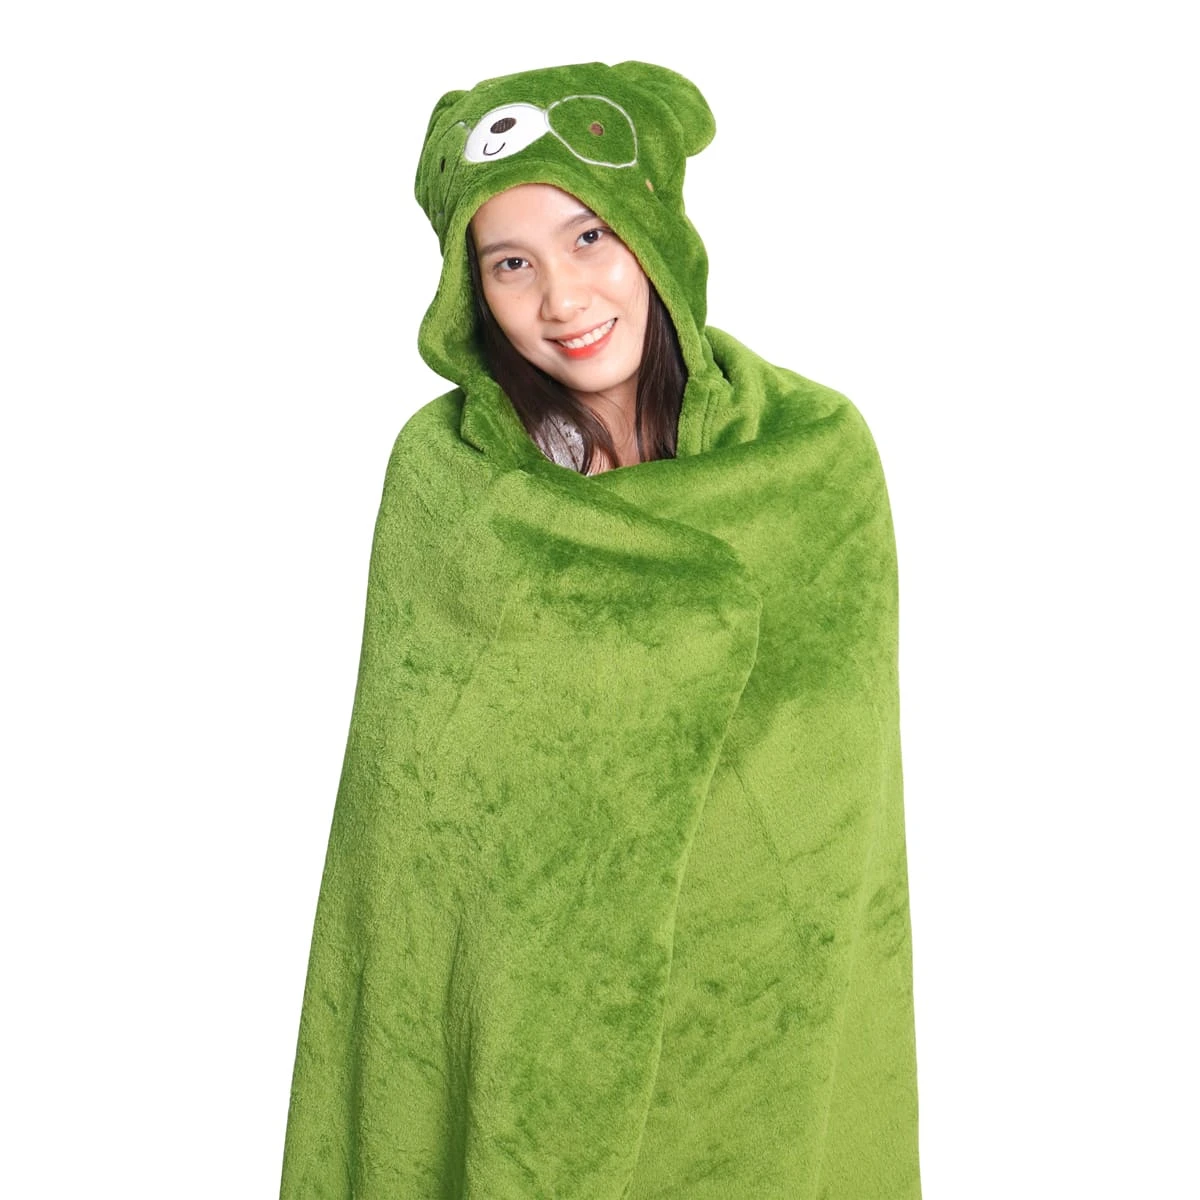 Recycled Polyester Hooded Flannel Blanket with Bear Design (Green)